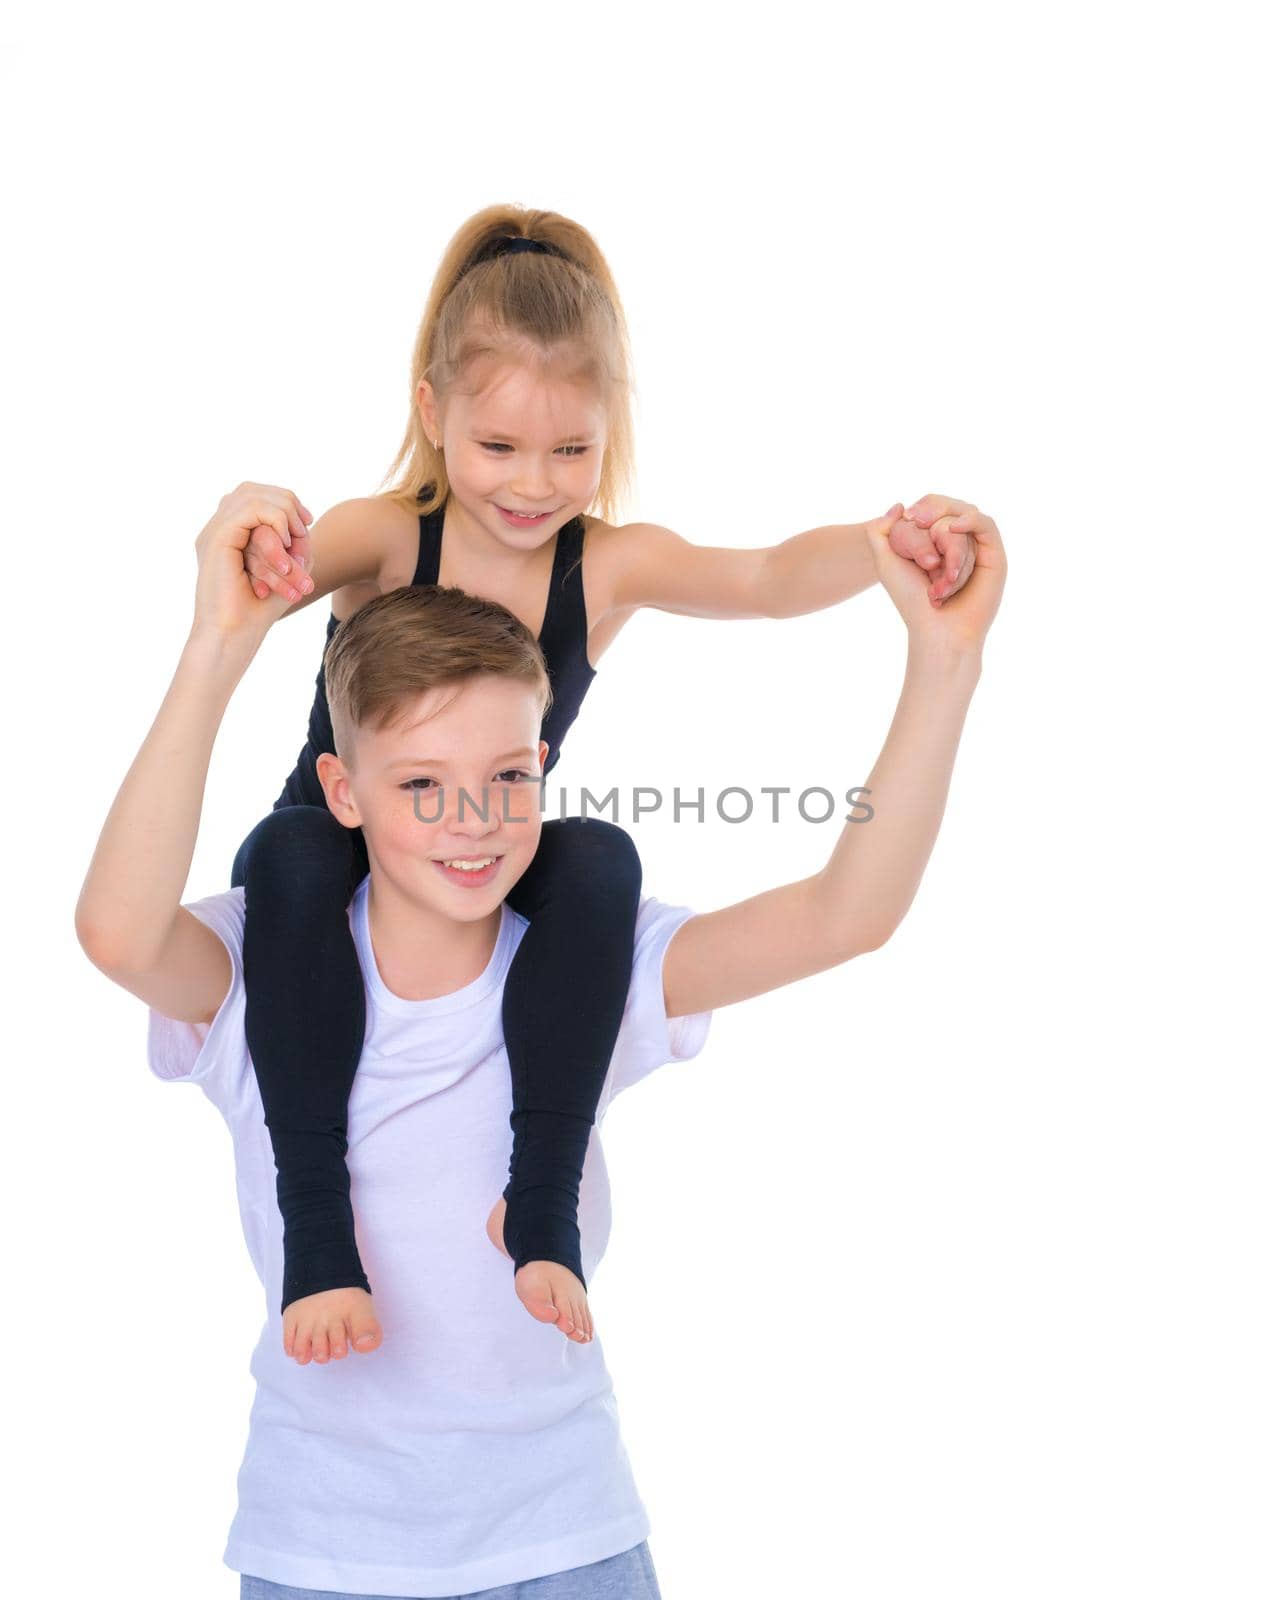 Charming little girl hugging a tall boy with blond hair. A romantic couple is happy with the joint time brought. A happy sister hugs her brother. The concept is a happy childhood. Isolated on white background.